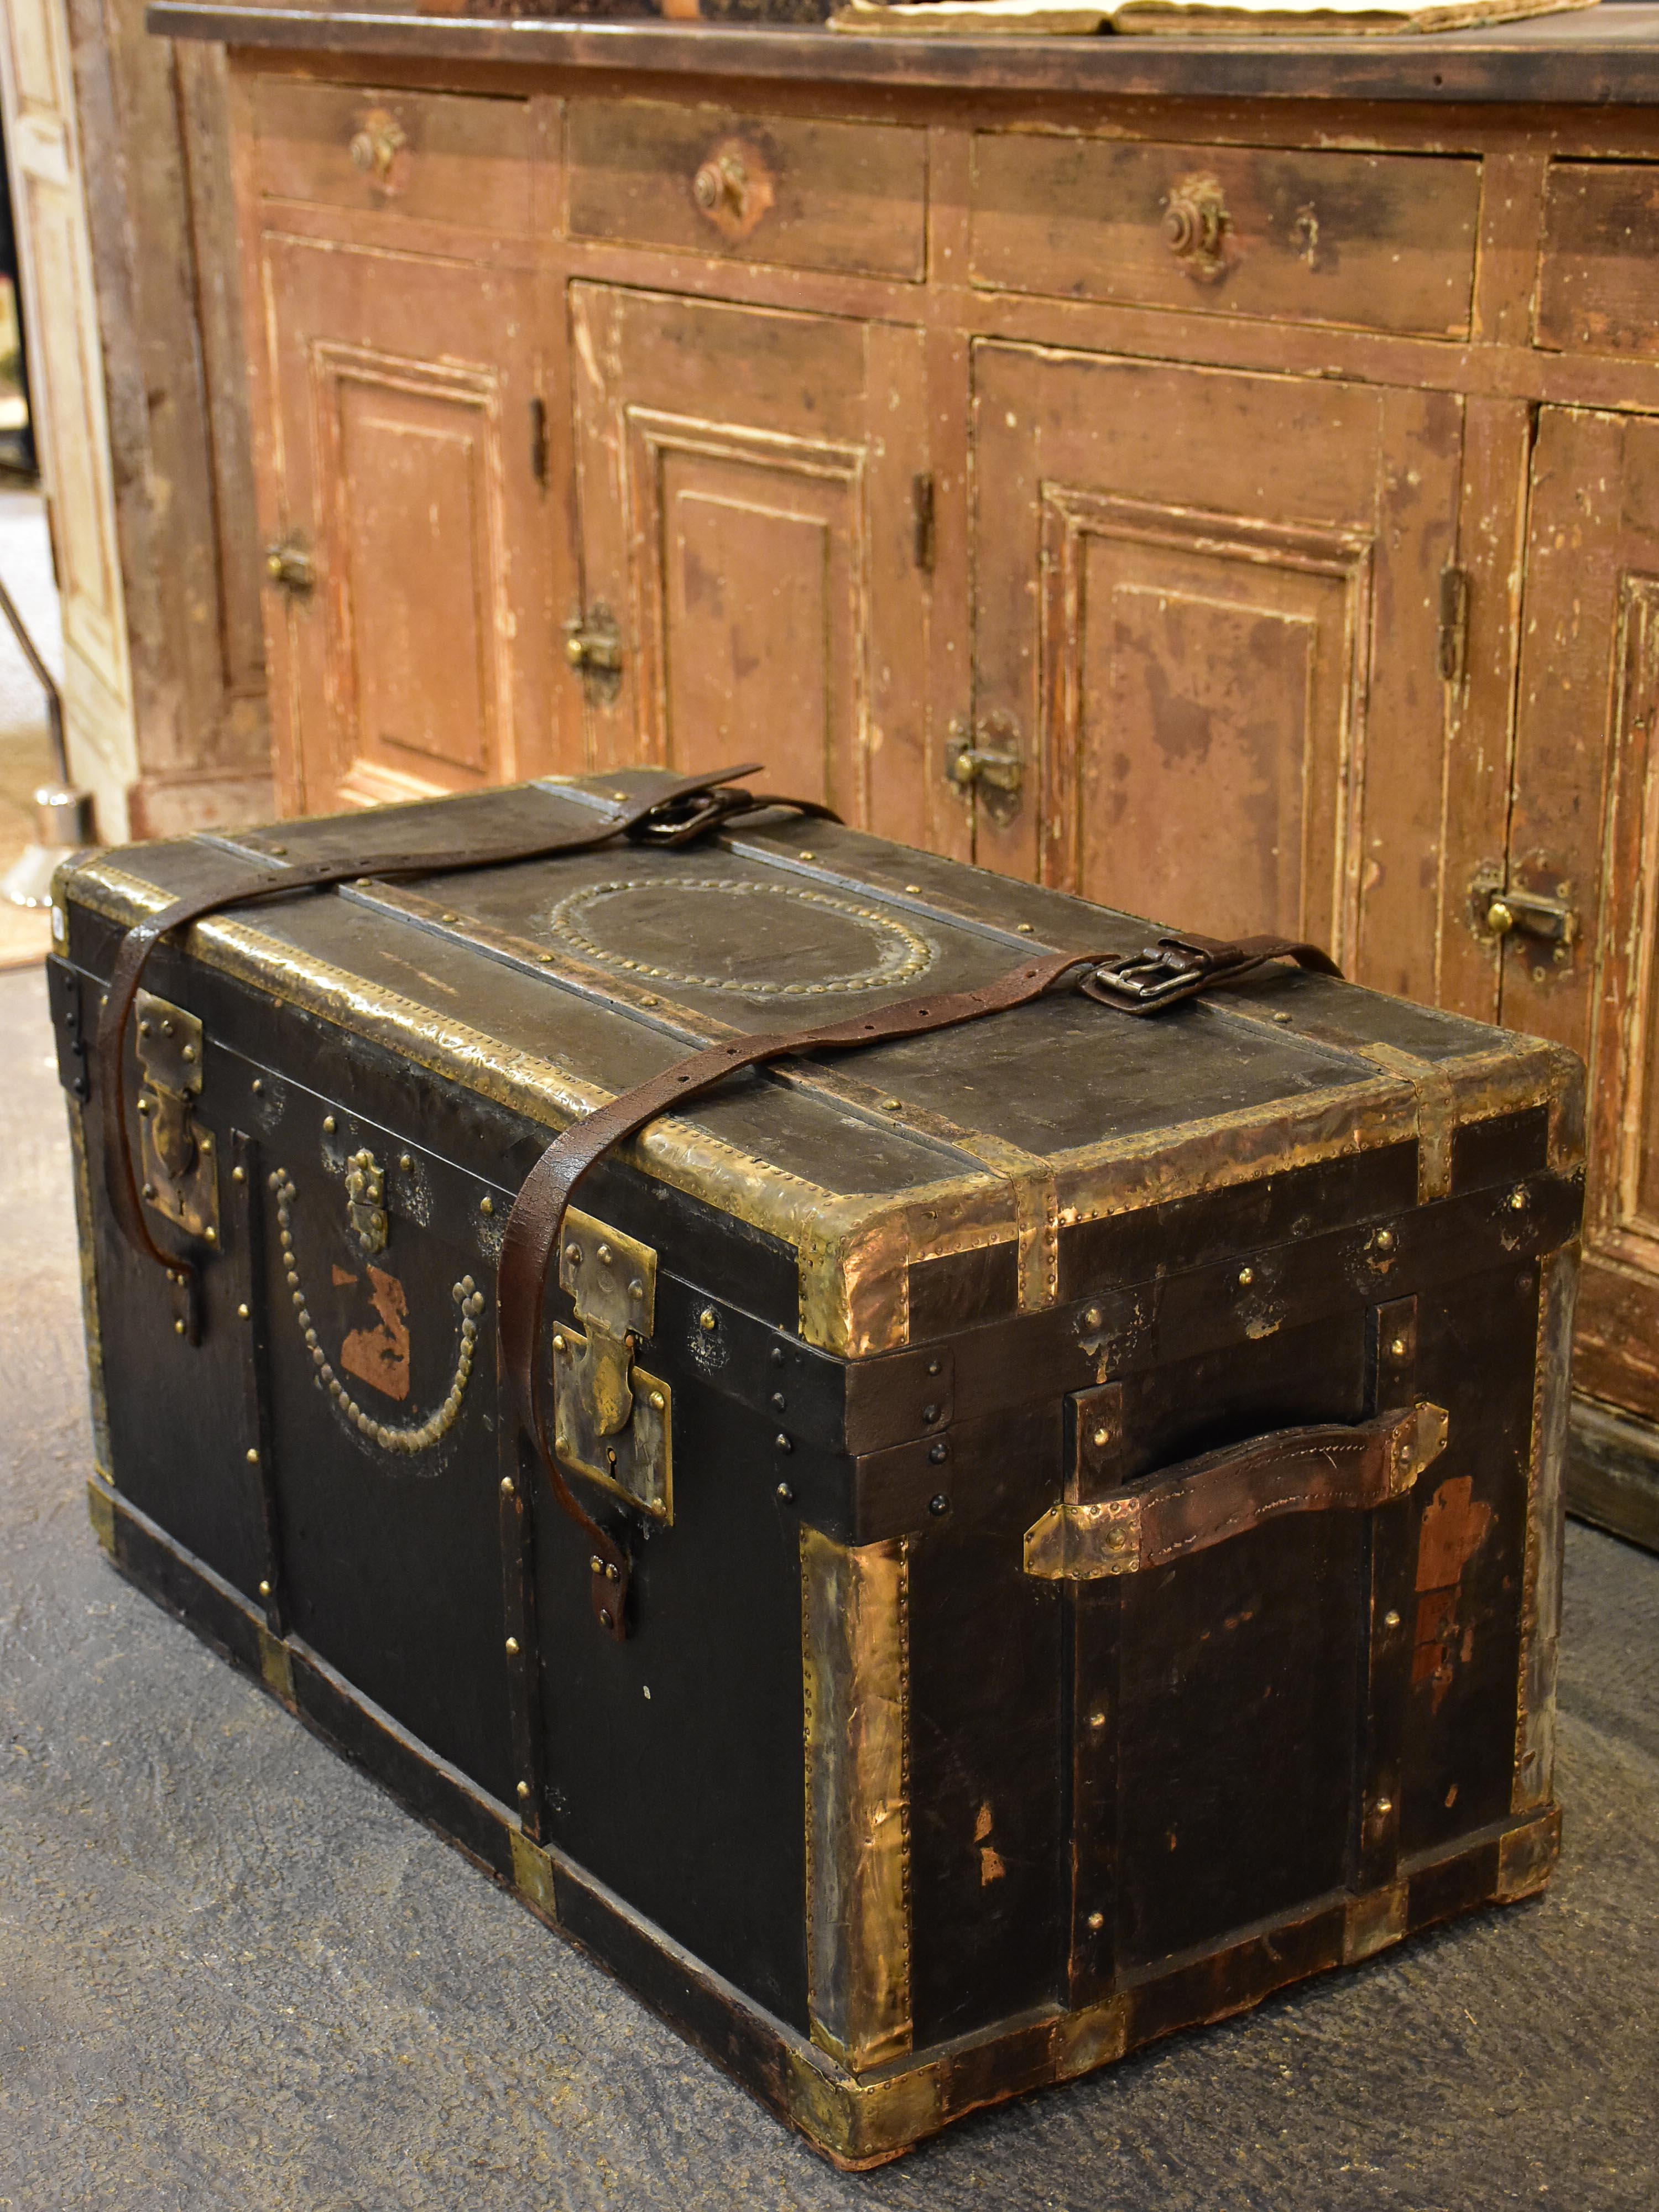 A vintage travel wardrobe trunk (France, late 19th, early 20th